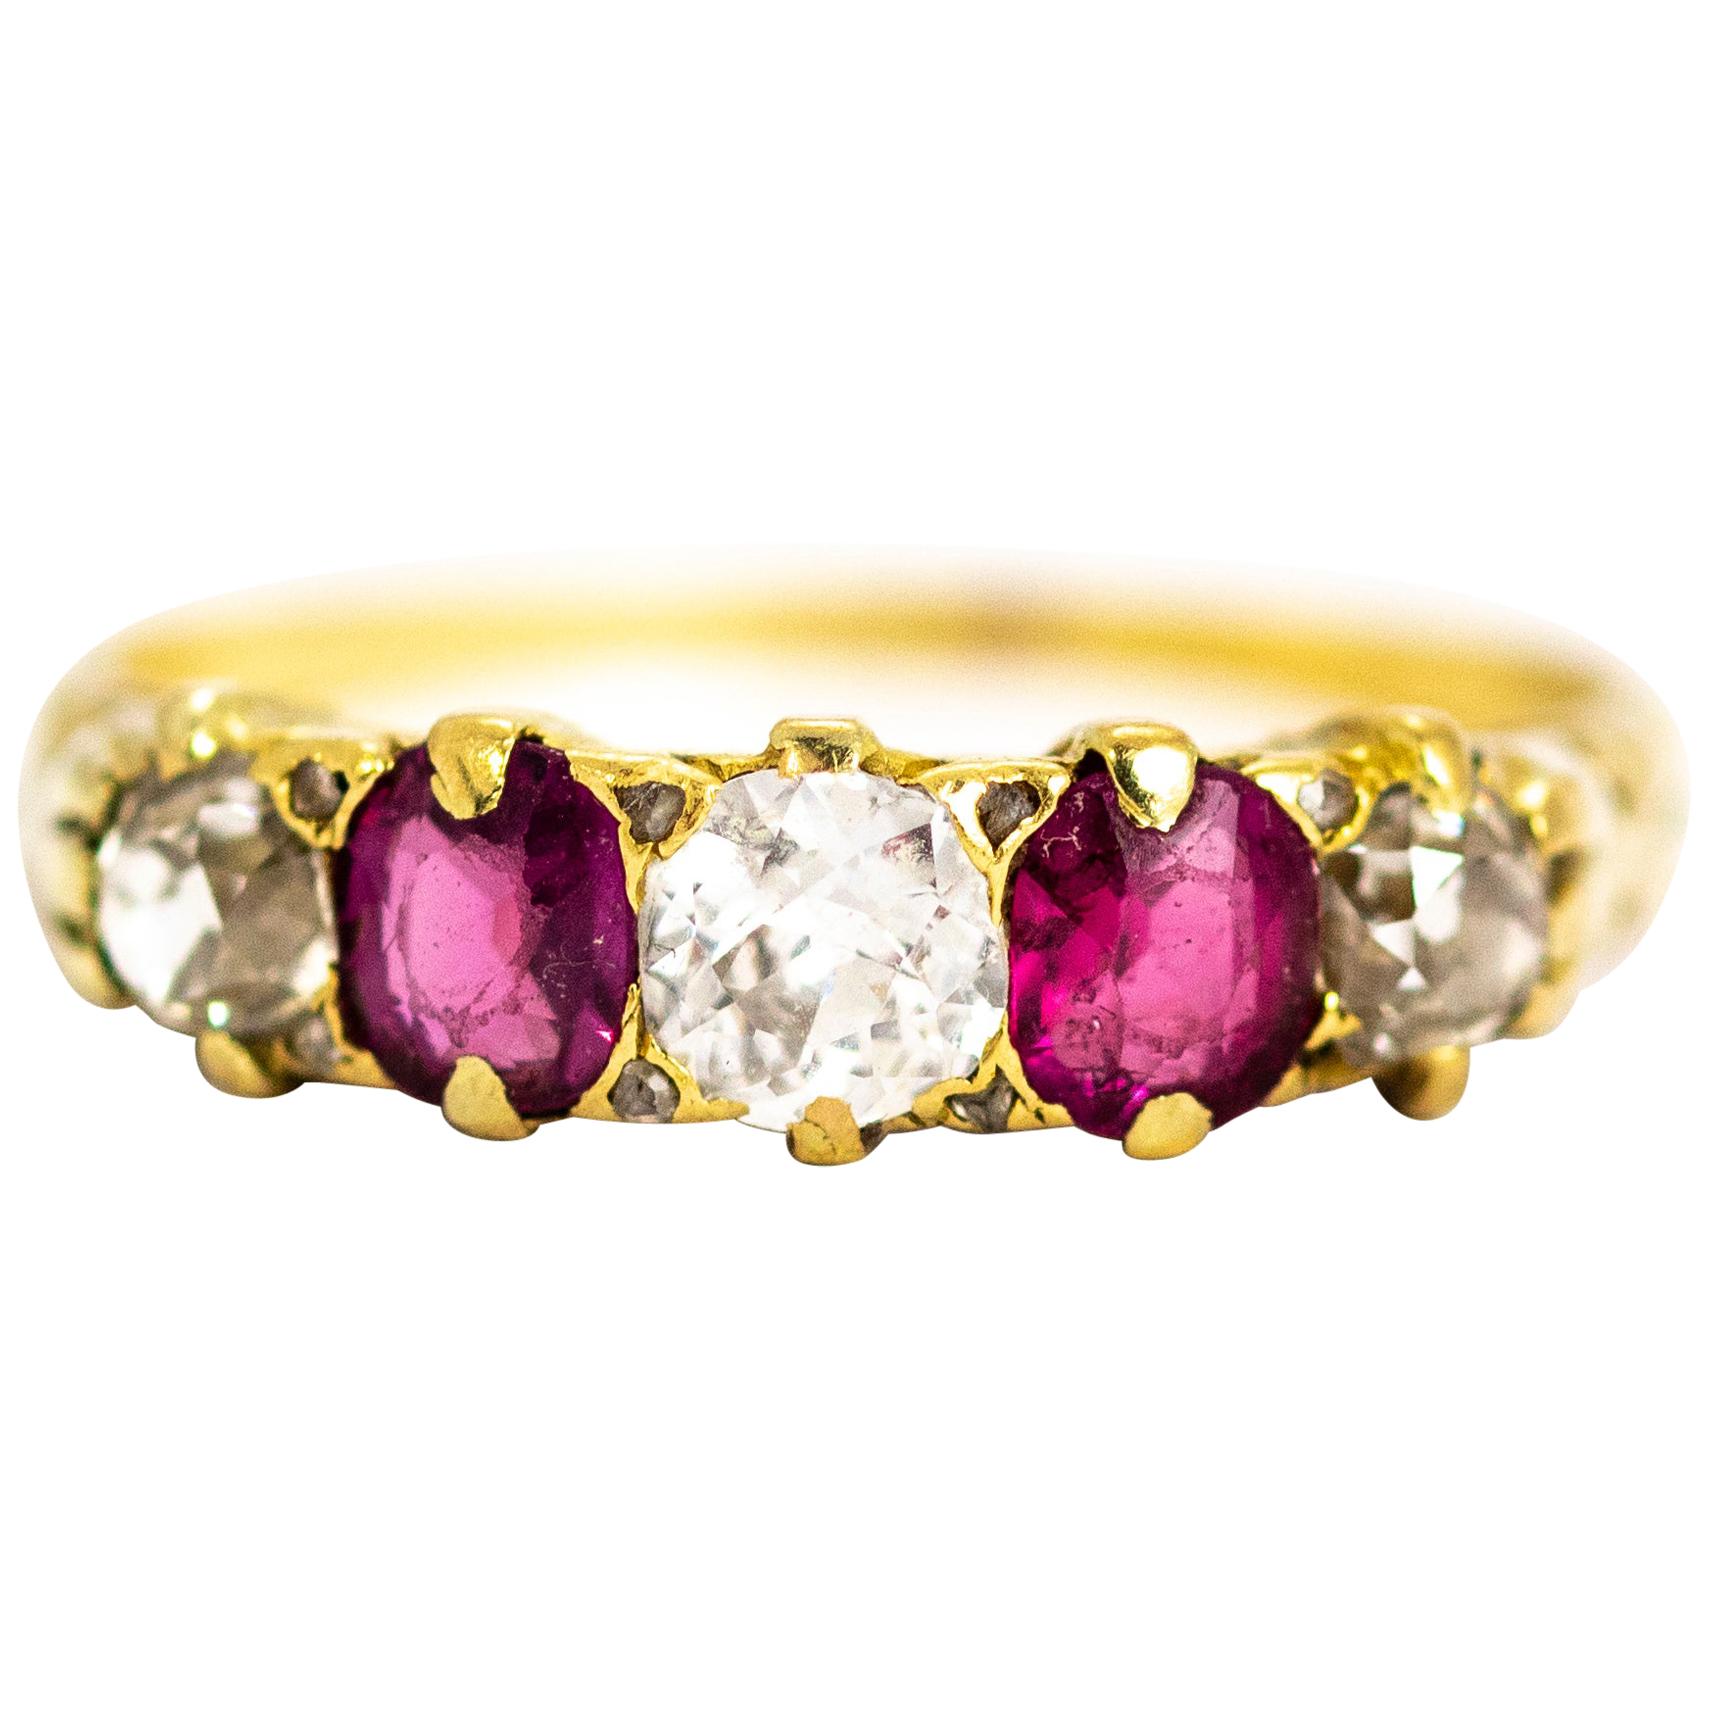 Vintage 18 Carat Gold Diamond and Ruby Five-Stone Ring